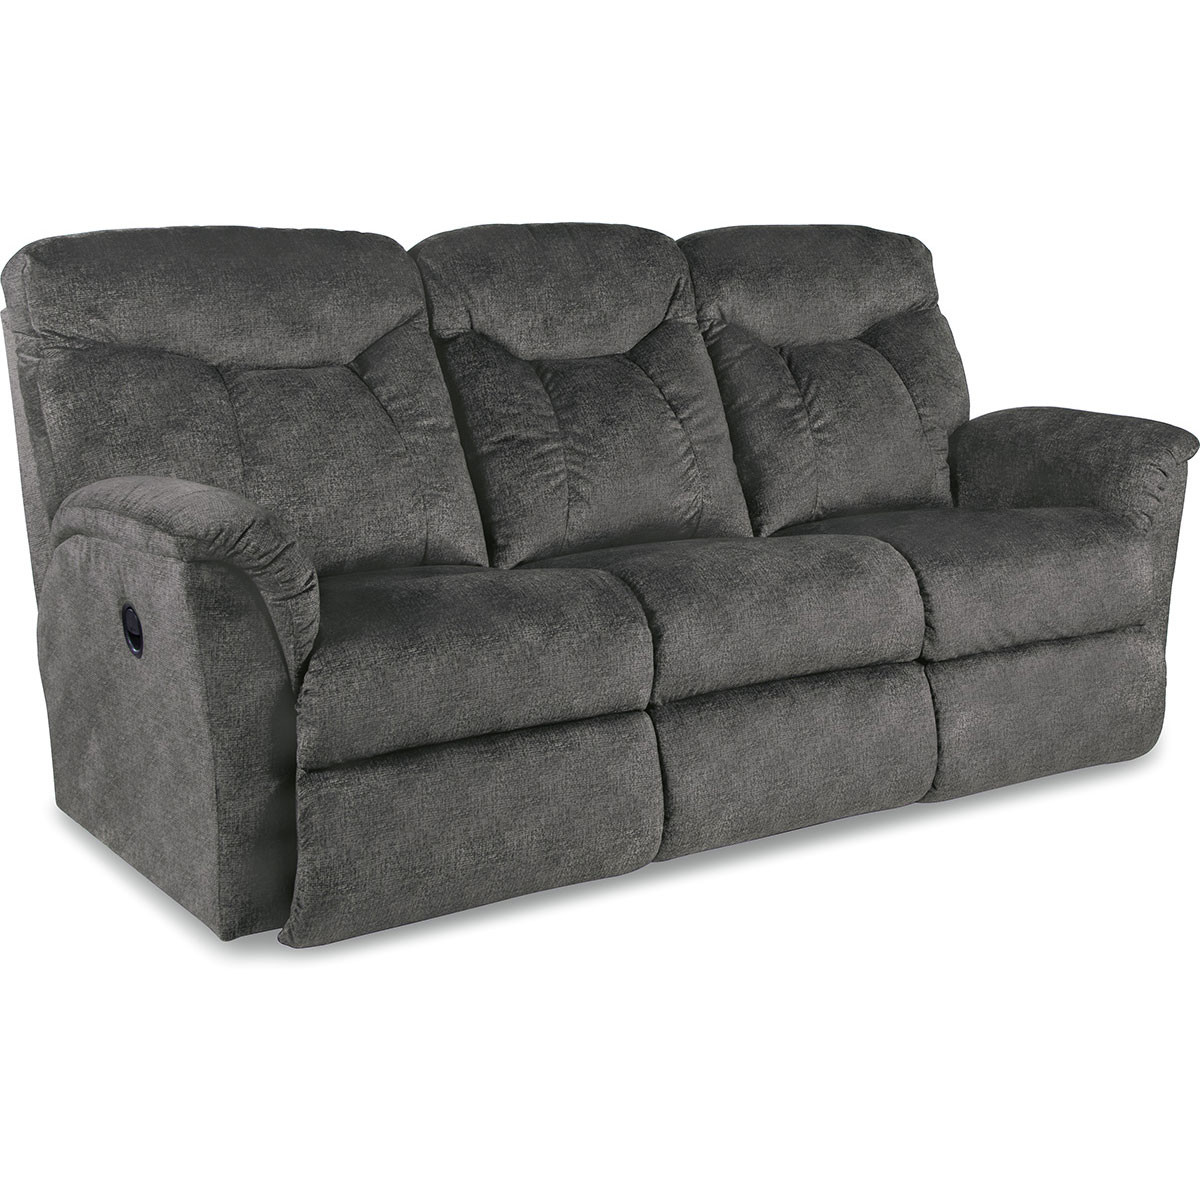 Best ideas about Lazyboy Reclining Sofa
. Save or Pin Fortune La Z Time Full Reclining Sofa Now.